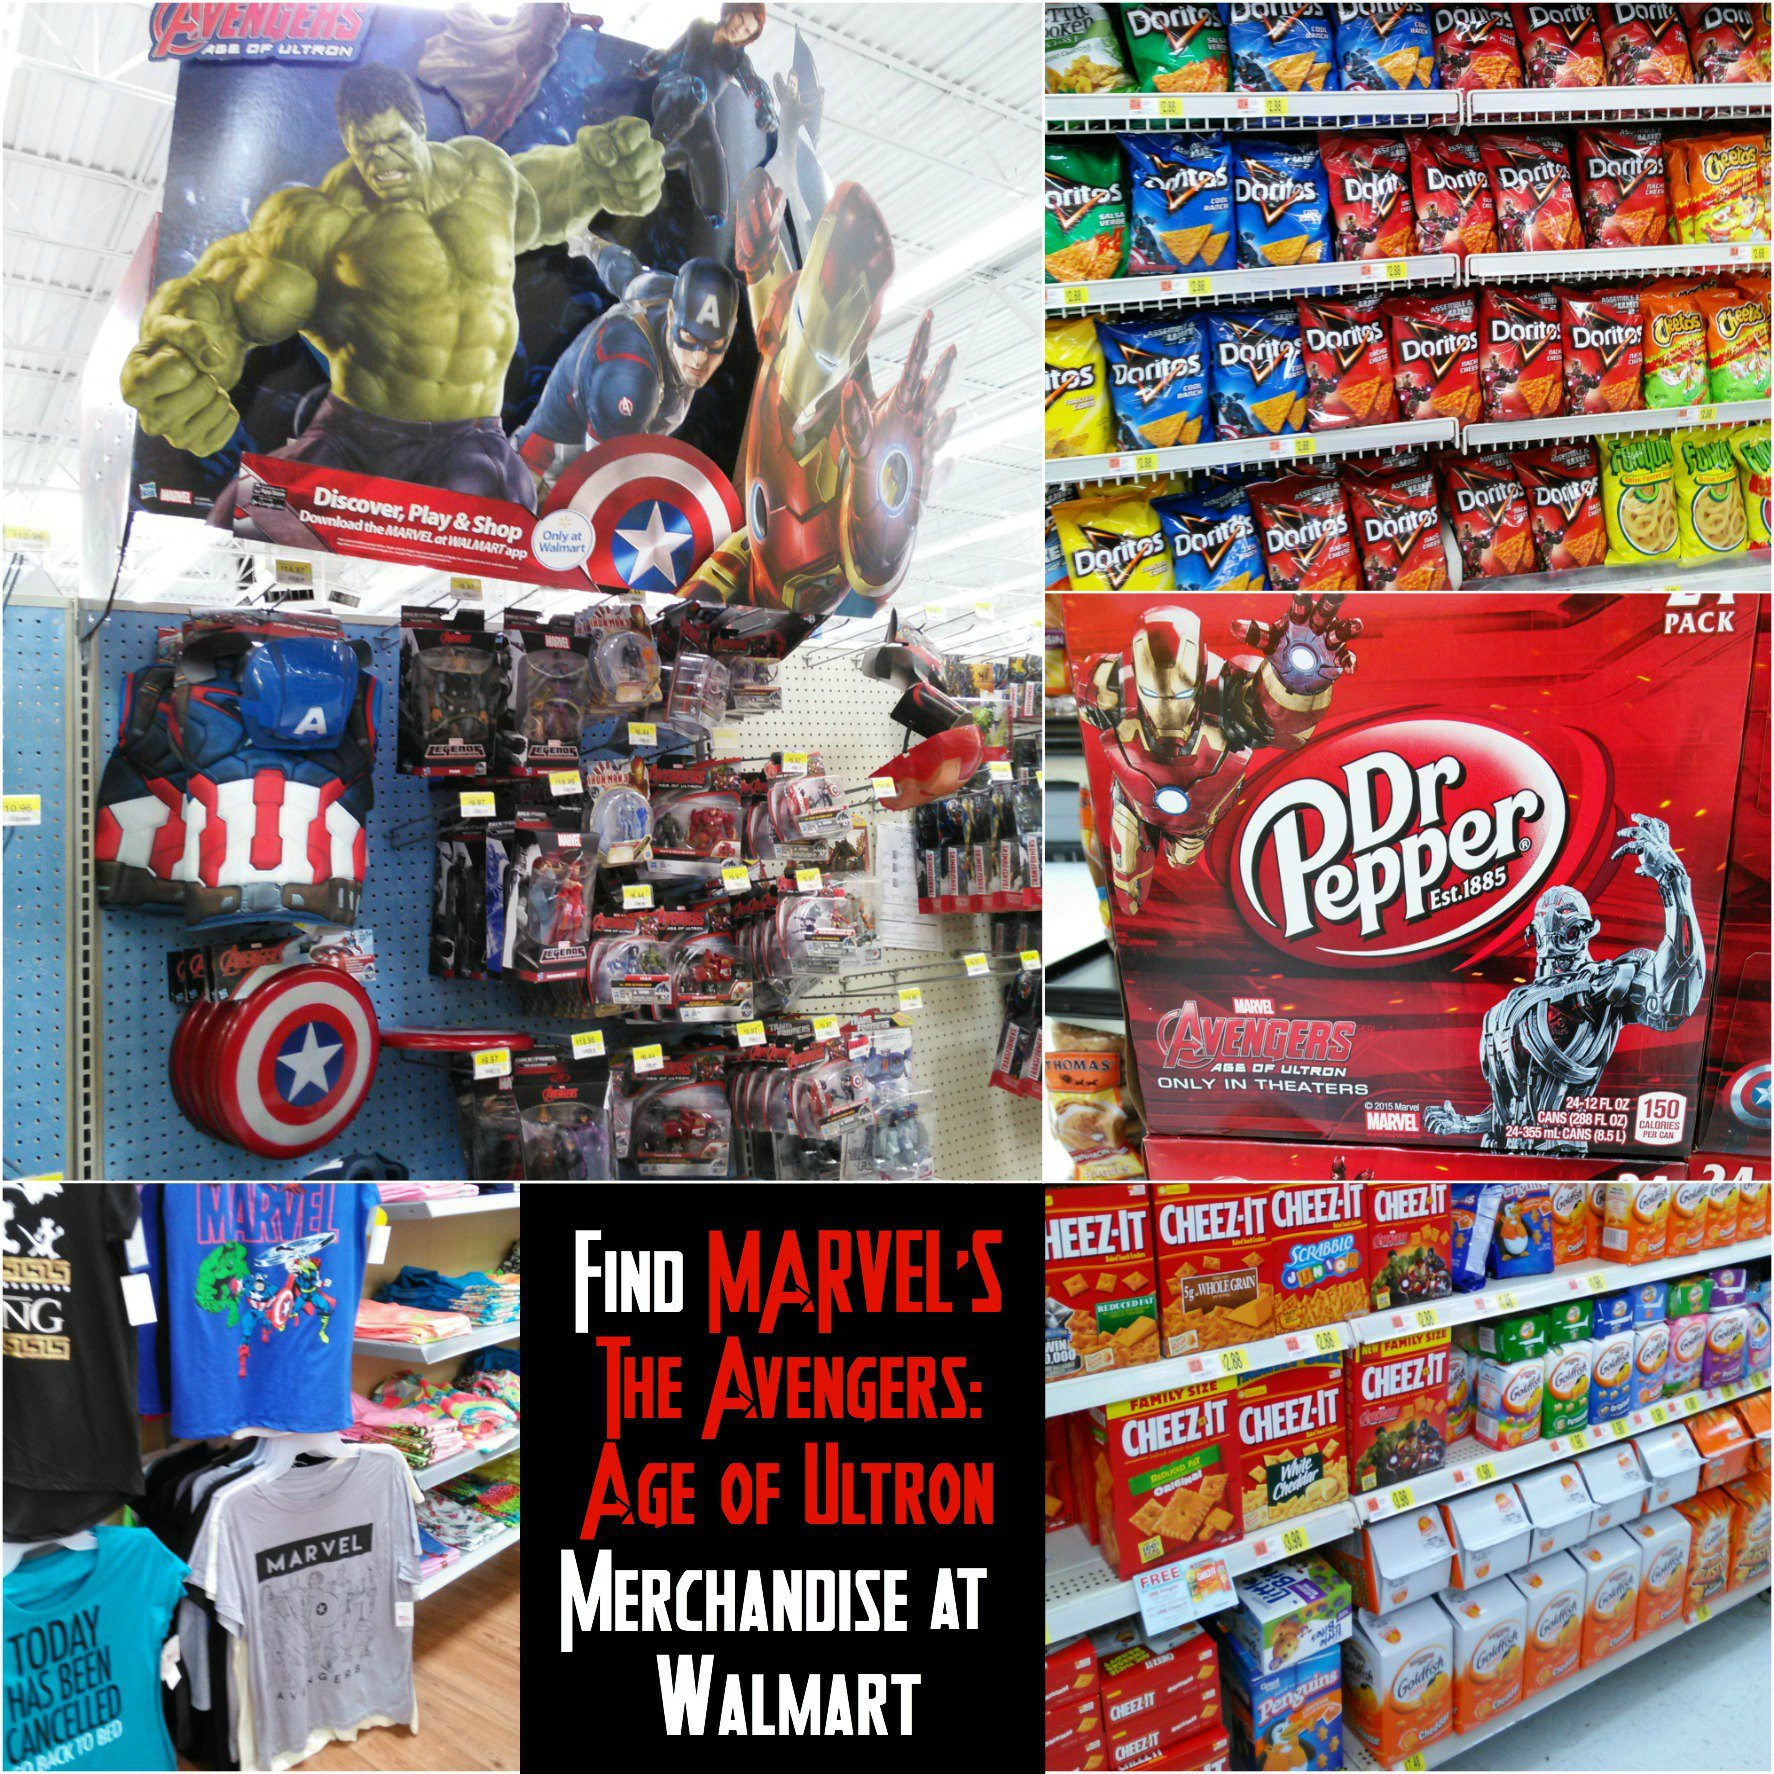 Find MARVEL's The Avengers: Age of Ultron Merchandise at Walmart